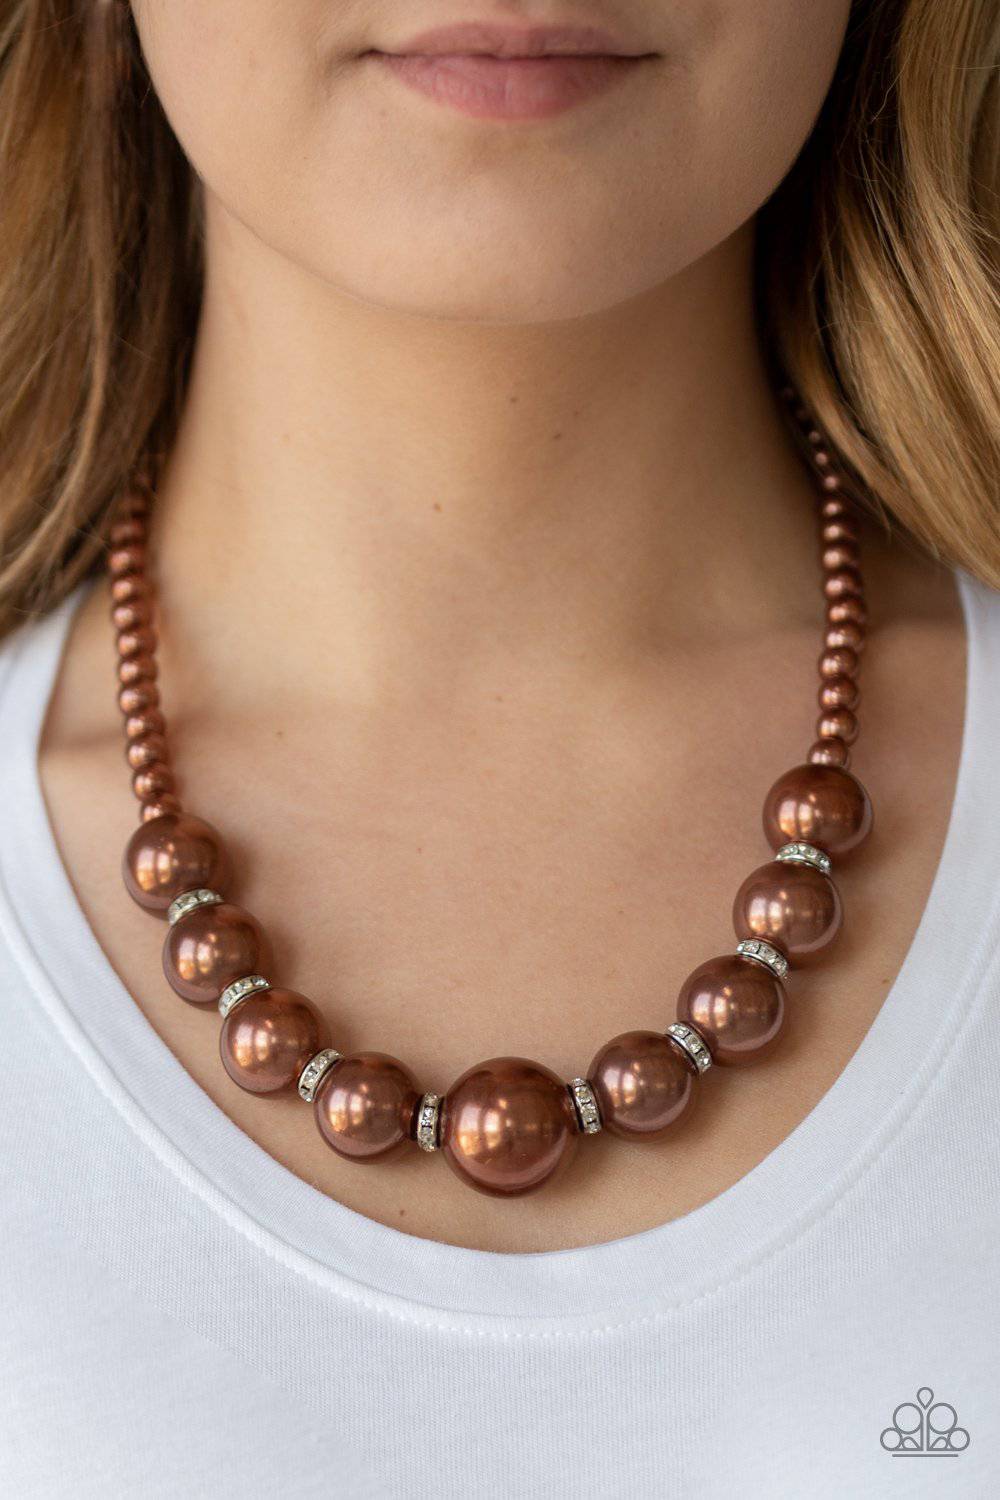 SoHo Socialite - Brown Pearl Necklace - Paparazzi Accessories - GlaMarous Titi Jewels